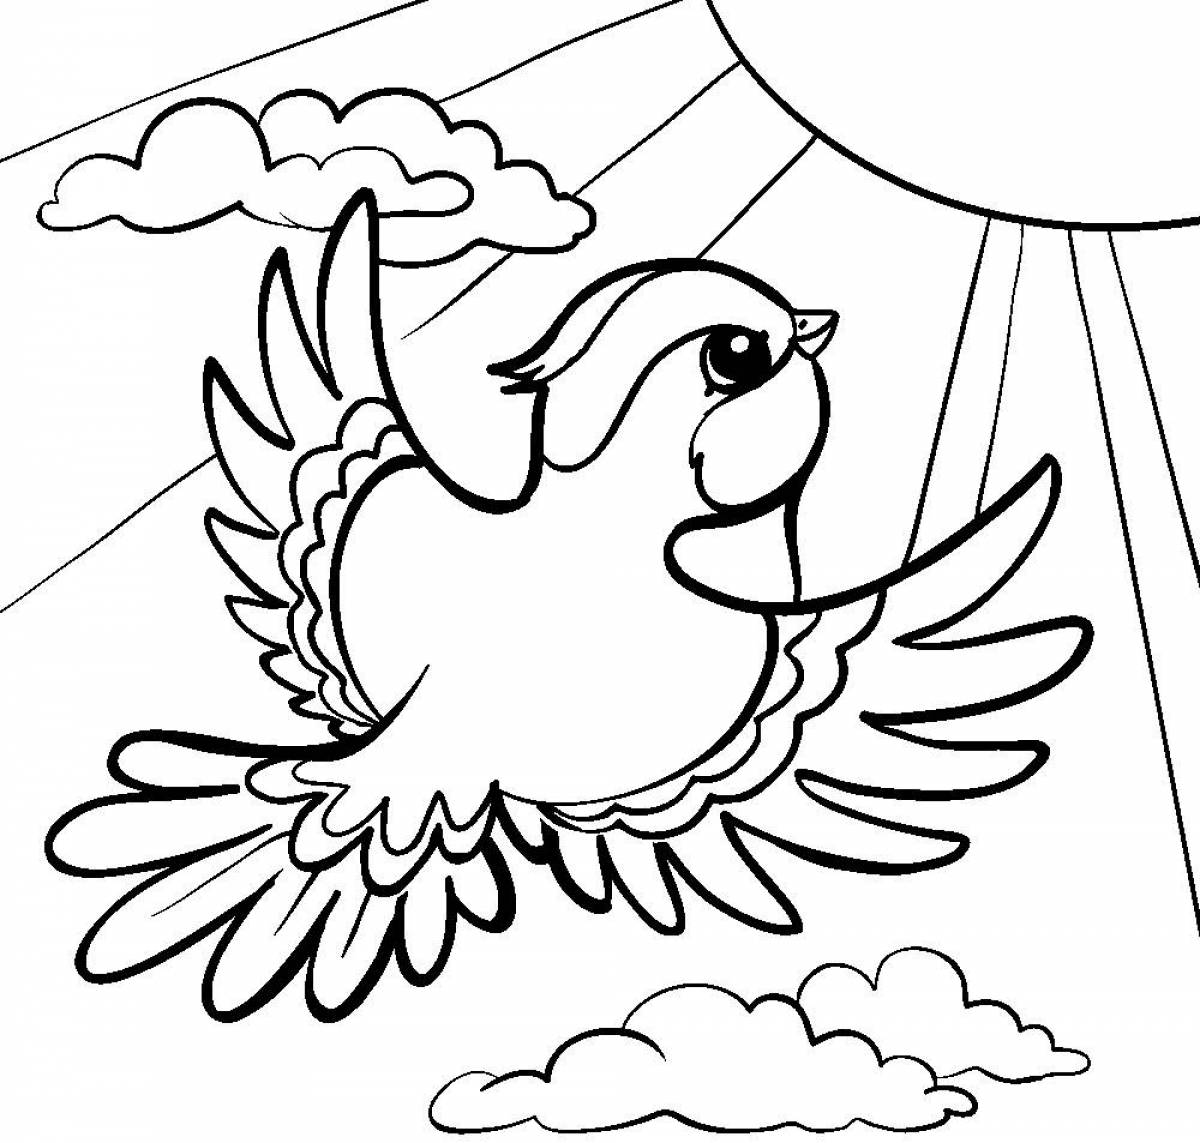 Bright coloring pages of birds for children 6-7 years old